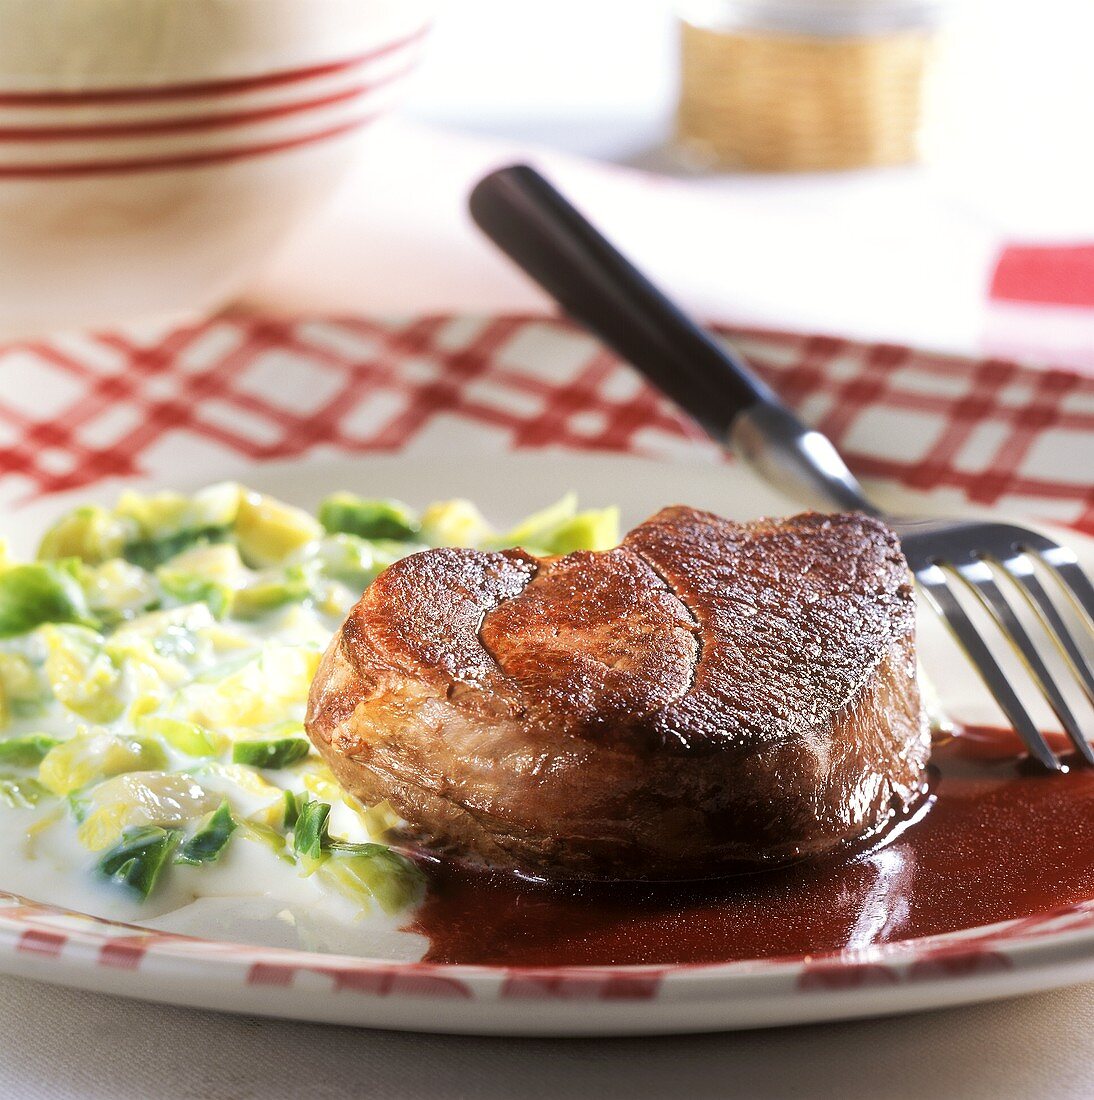 Venison steak with Brussels sprouts and red wine sauce